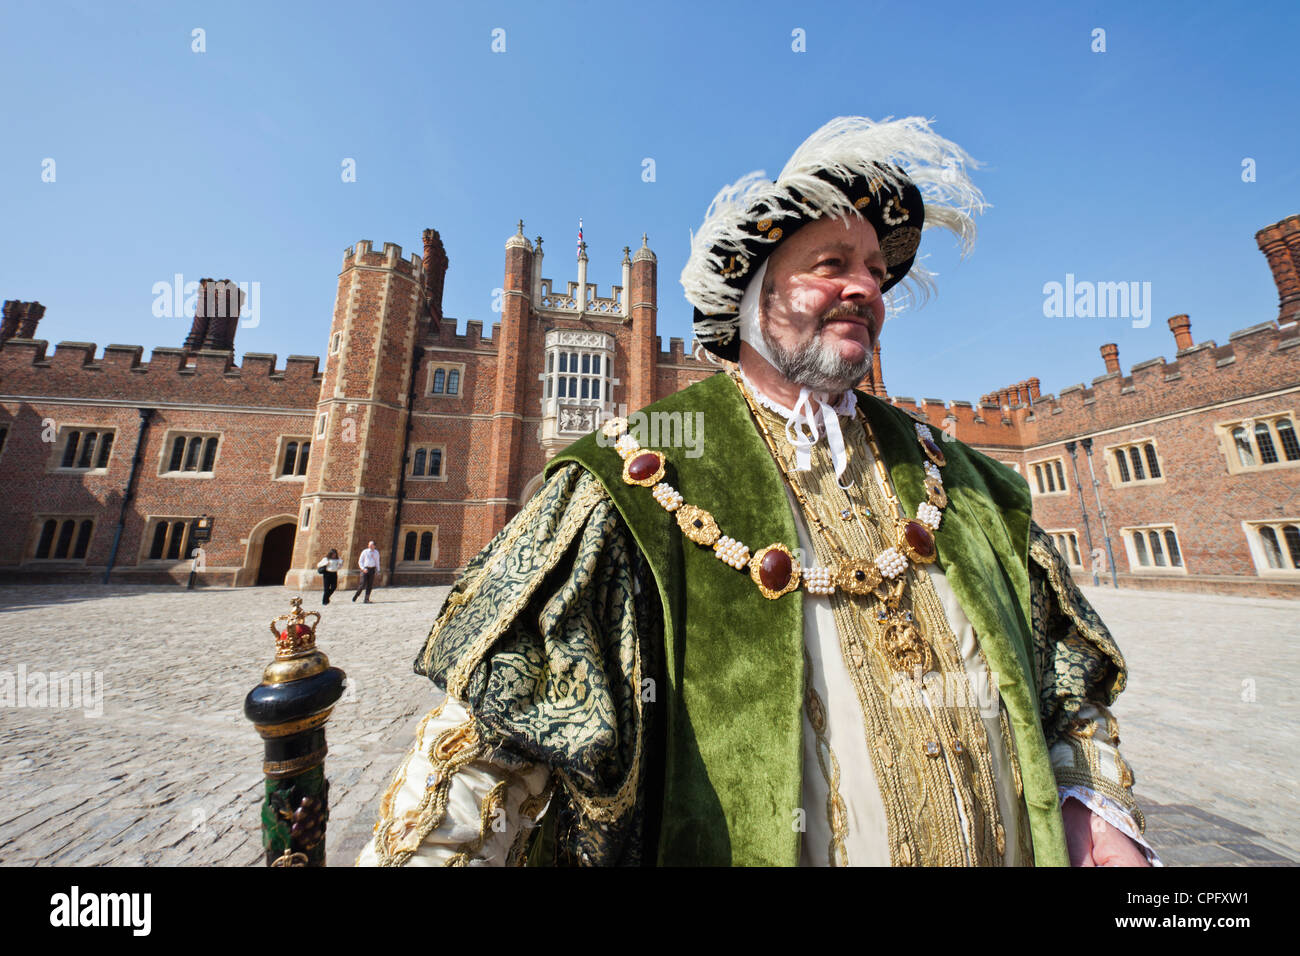 England, London, Surrey, Hampton Court Palace, Henry VIII Character in Period Costume Stock Photo